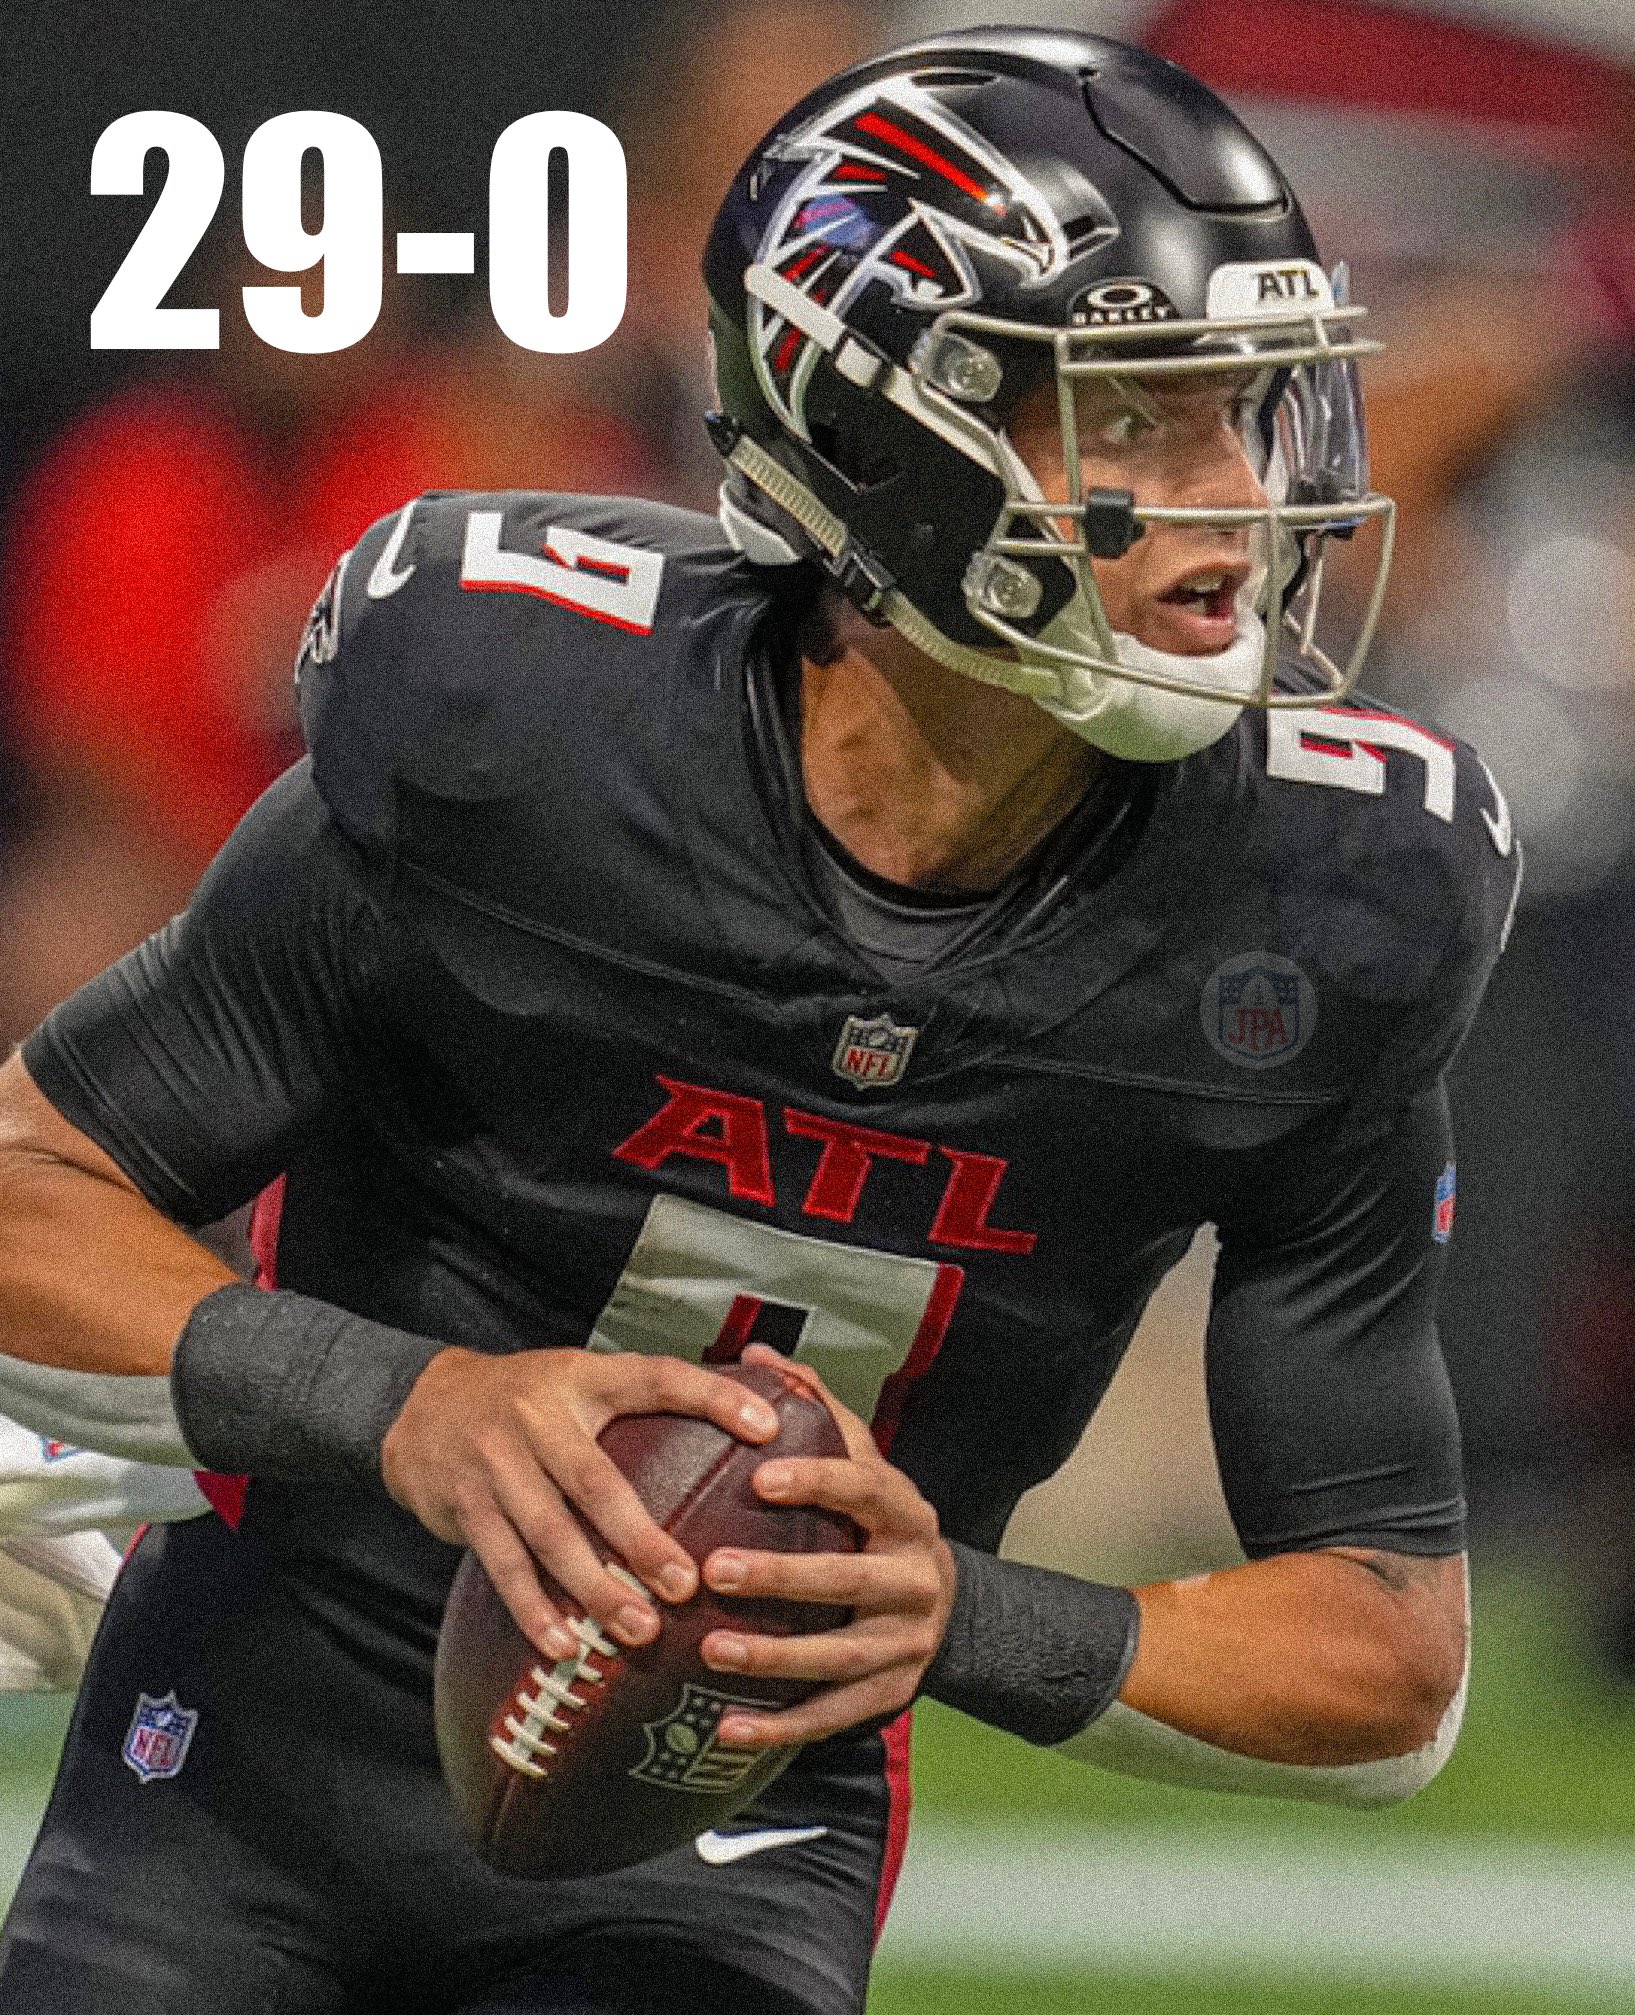 JPAFootball on X: 'A crazy stat: #Falcons QB Desmond Ridder is 29-0 at home  in his football career from college up until now as an #NFL starter. The  Falcons will play the #